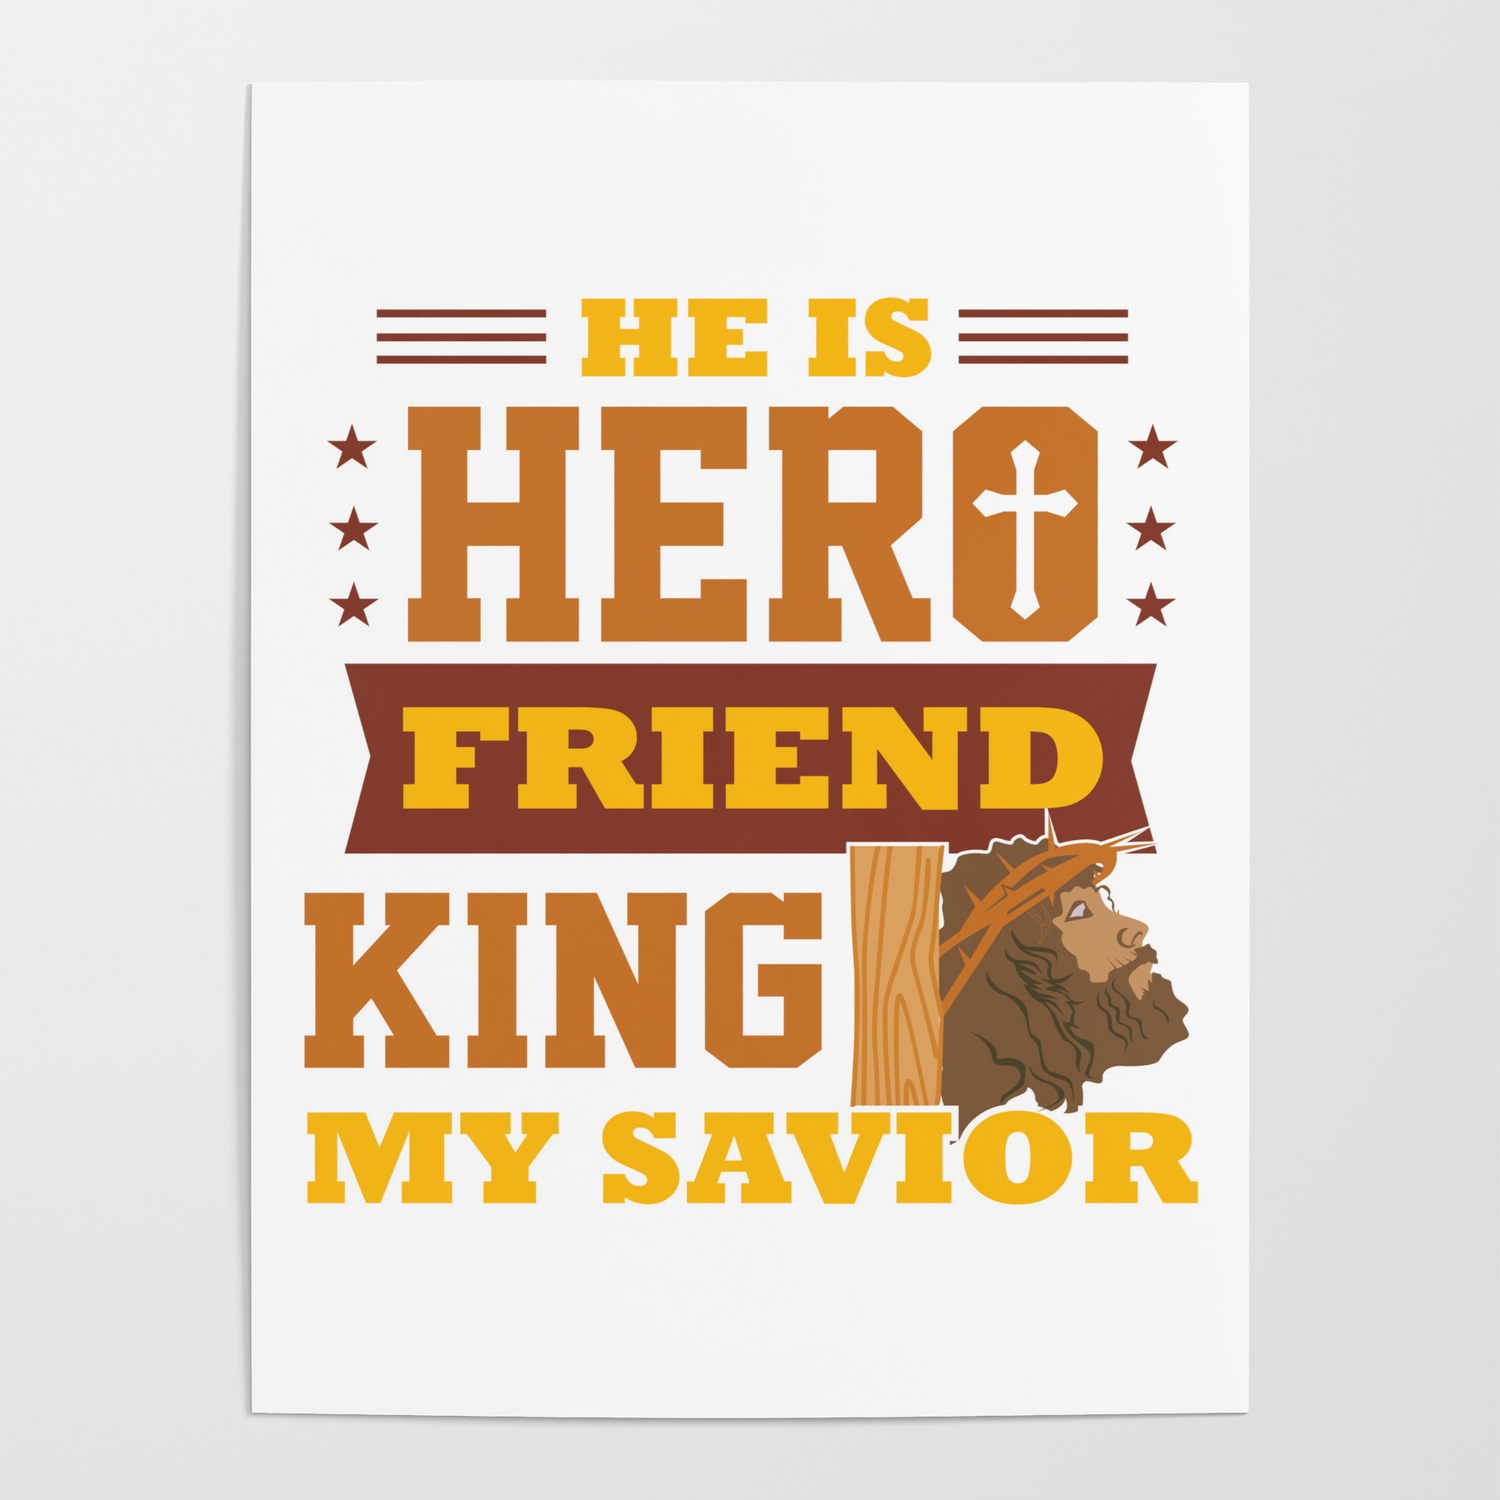 Funny Jesus Hero Friend Christian Quote Meme Gift Poster by Pubi Sales |  Society6